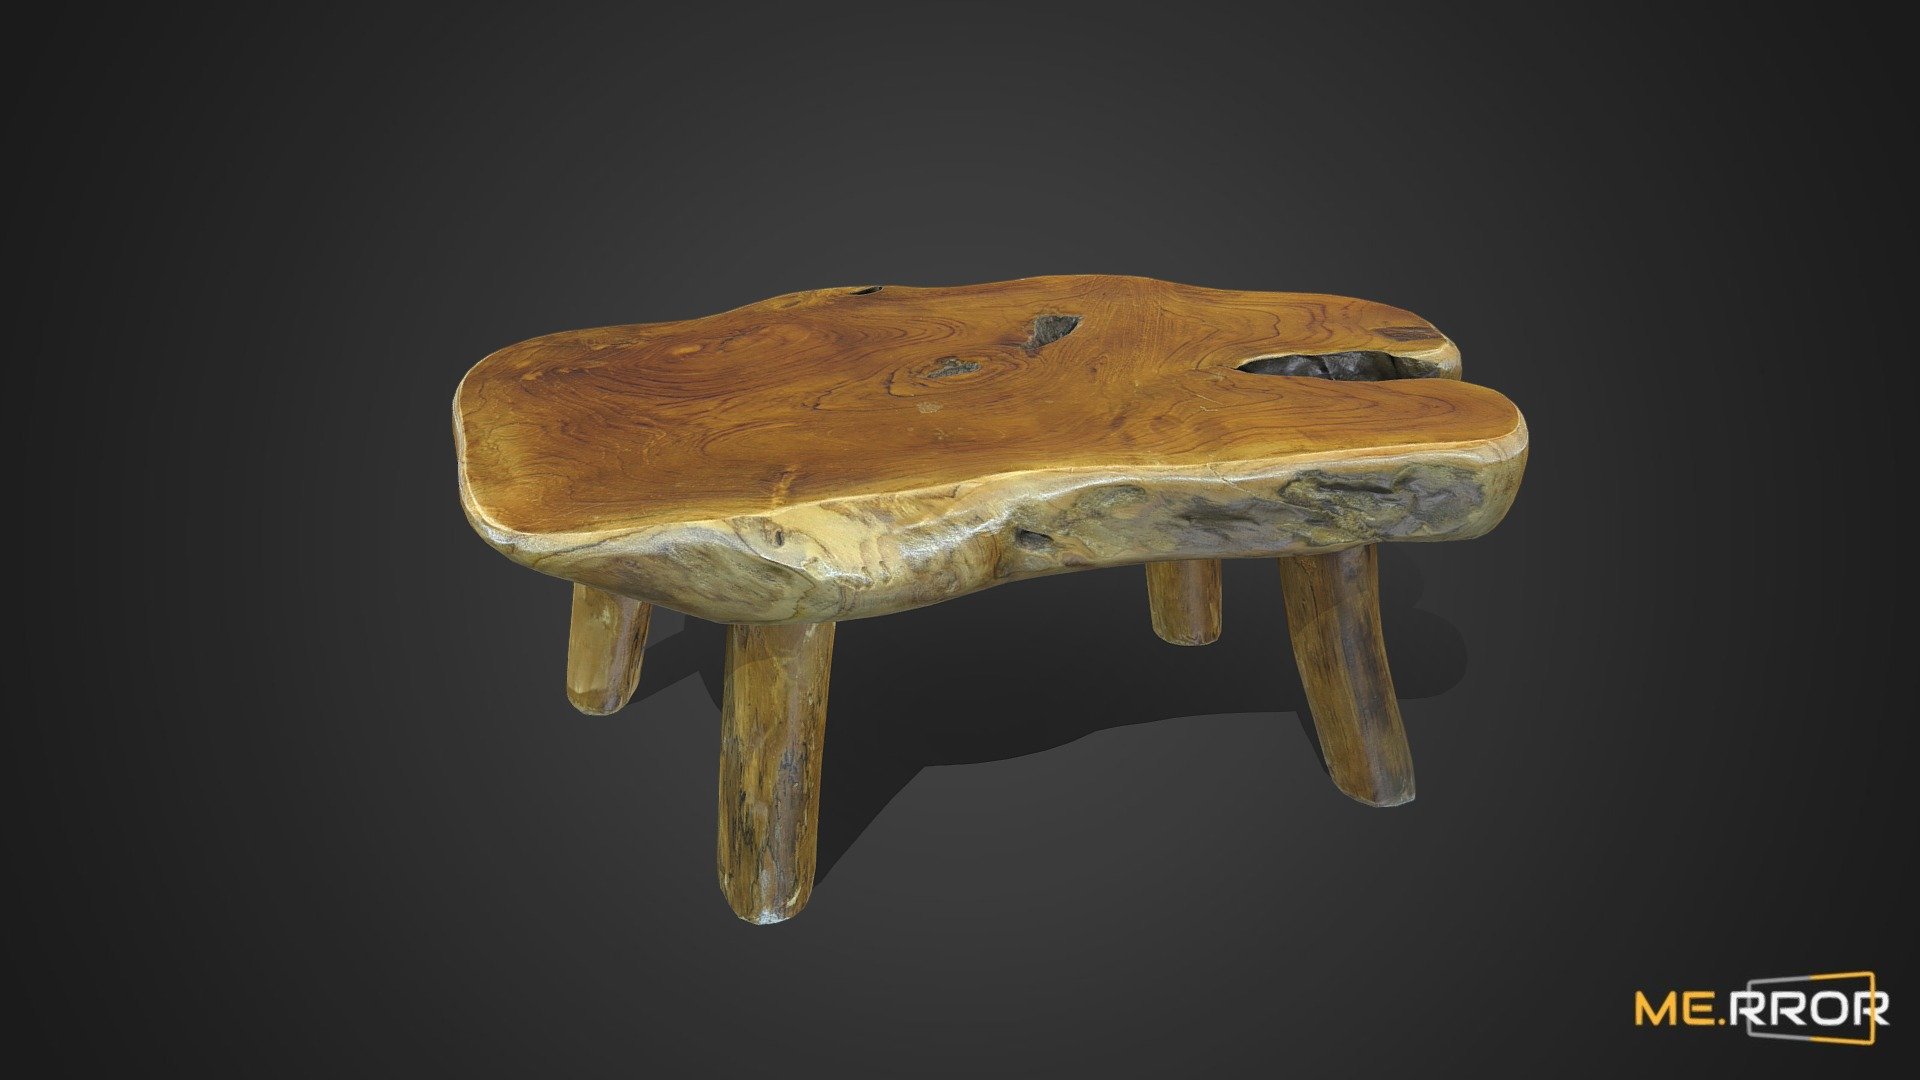 MERROR is a 3D Content PLATFORM which introduces various Asian assets to the 3D world


3DScanning #Photogrametry #ME.RROR - [Game-Ready] Mini Wood Table - Buy Royalty Free 3D model by ME.RROR (@merror) 3d model